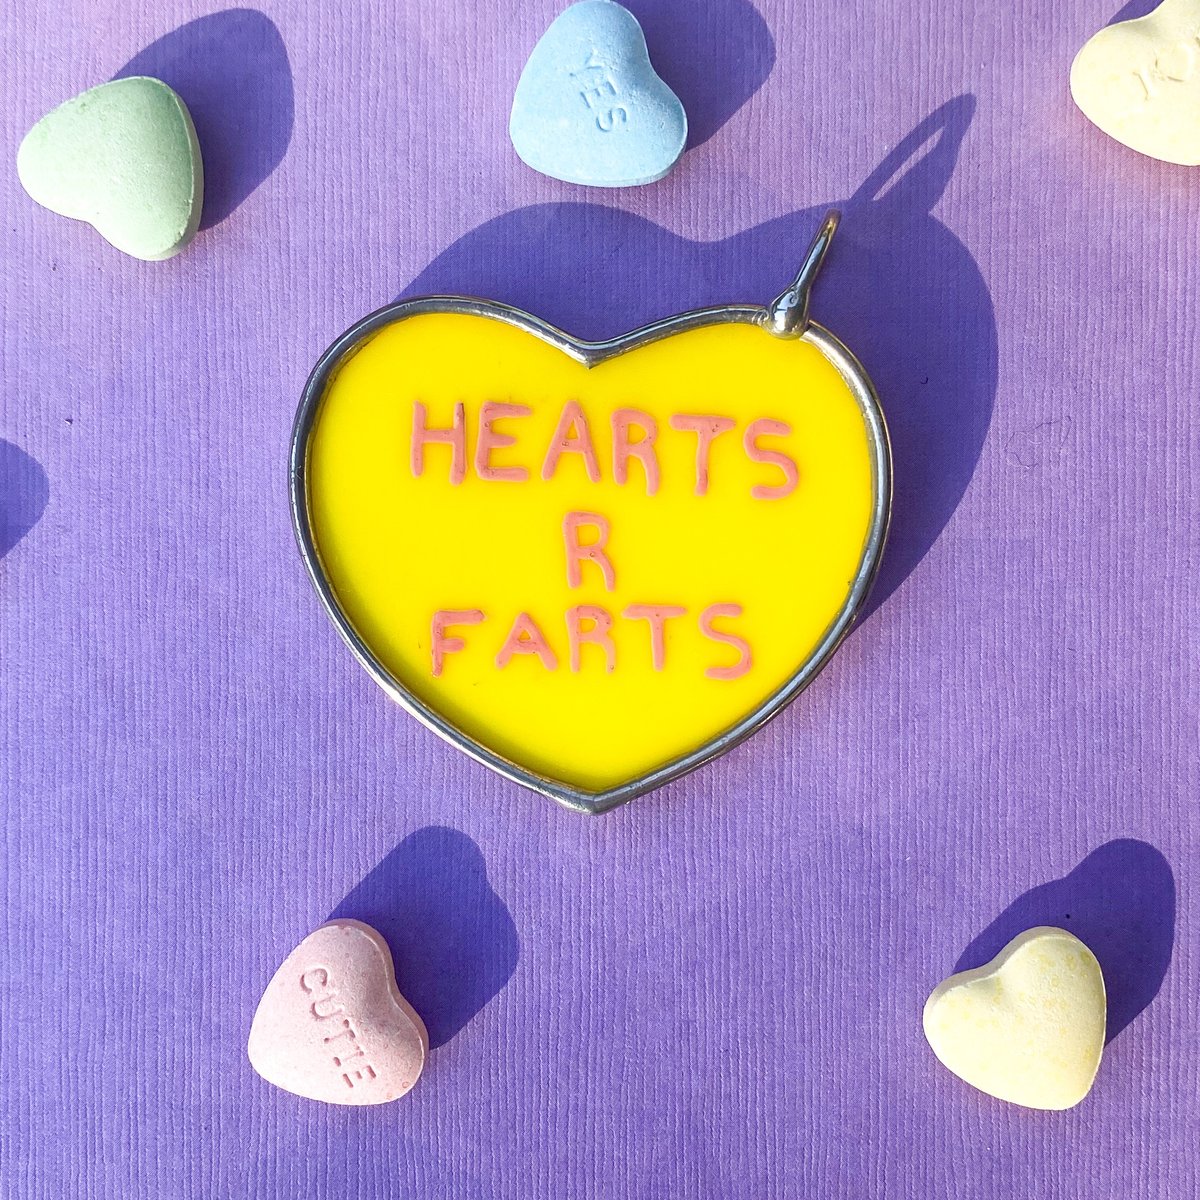 Image of Hearts R Farts Converastion Heart